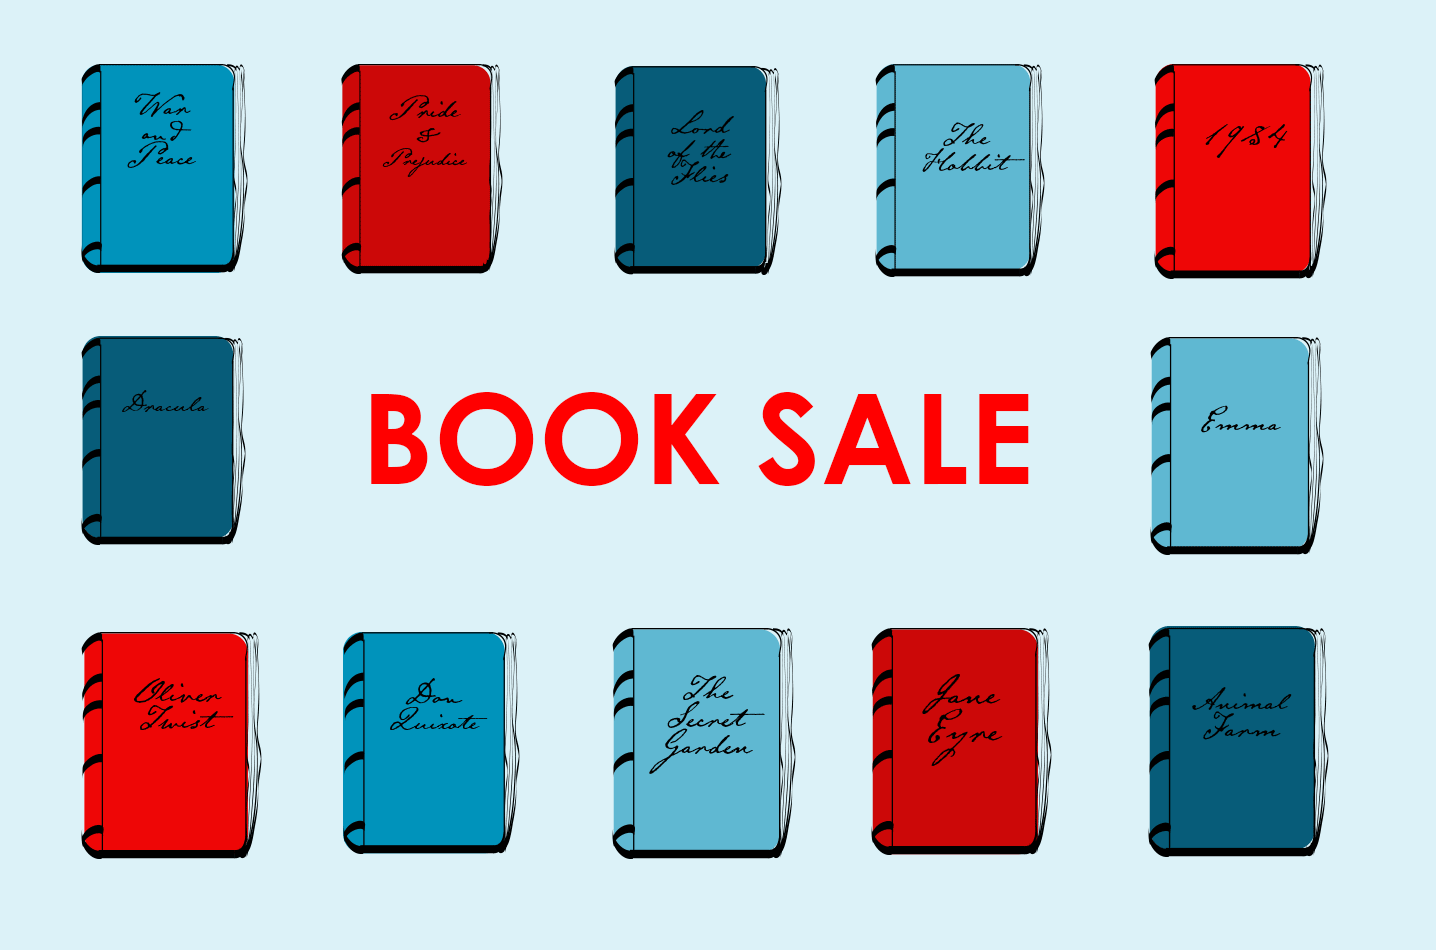 Indulge your tsundoku at the Friends of the Plano Public Library Book Sale